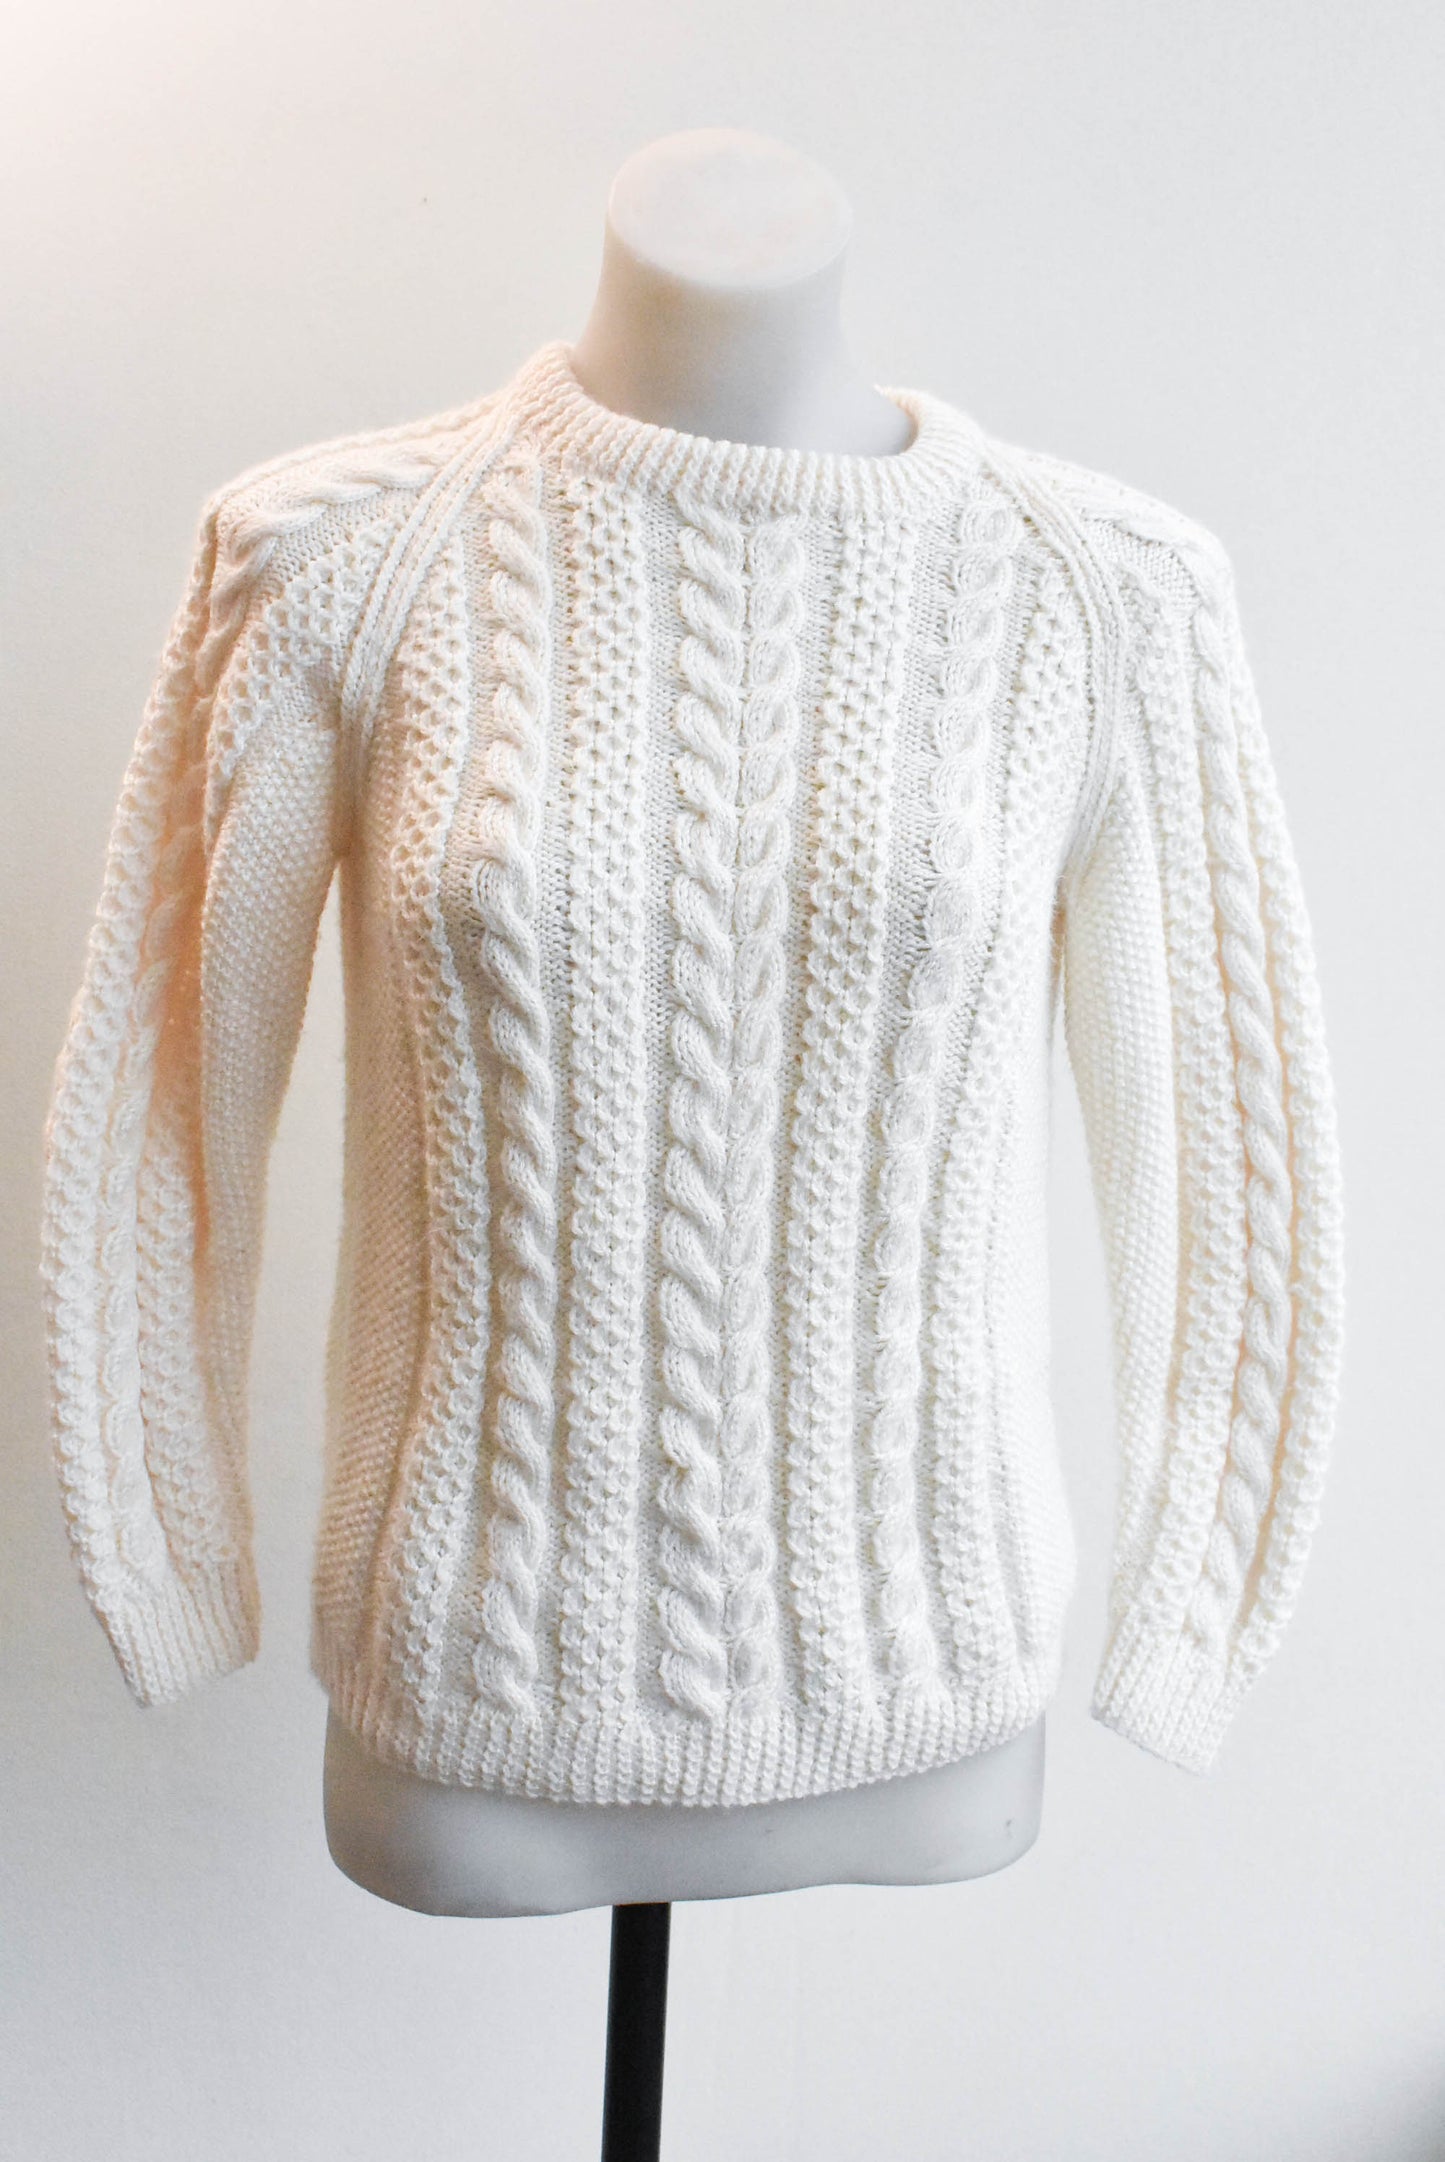 Handmade cable knit cream jumper, XS